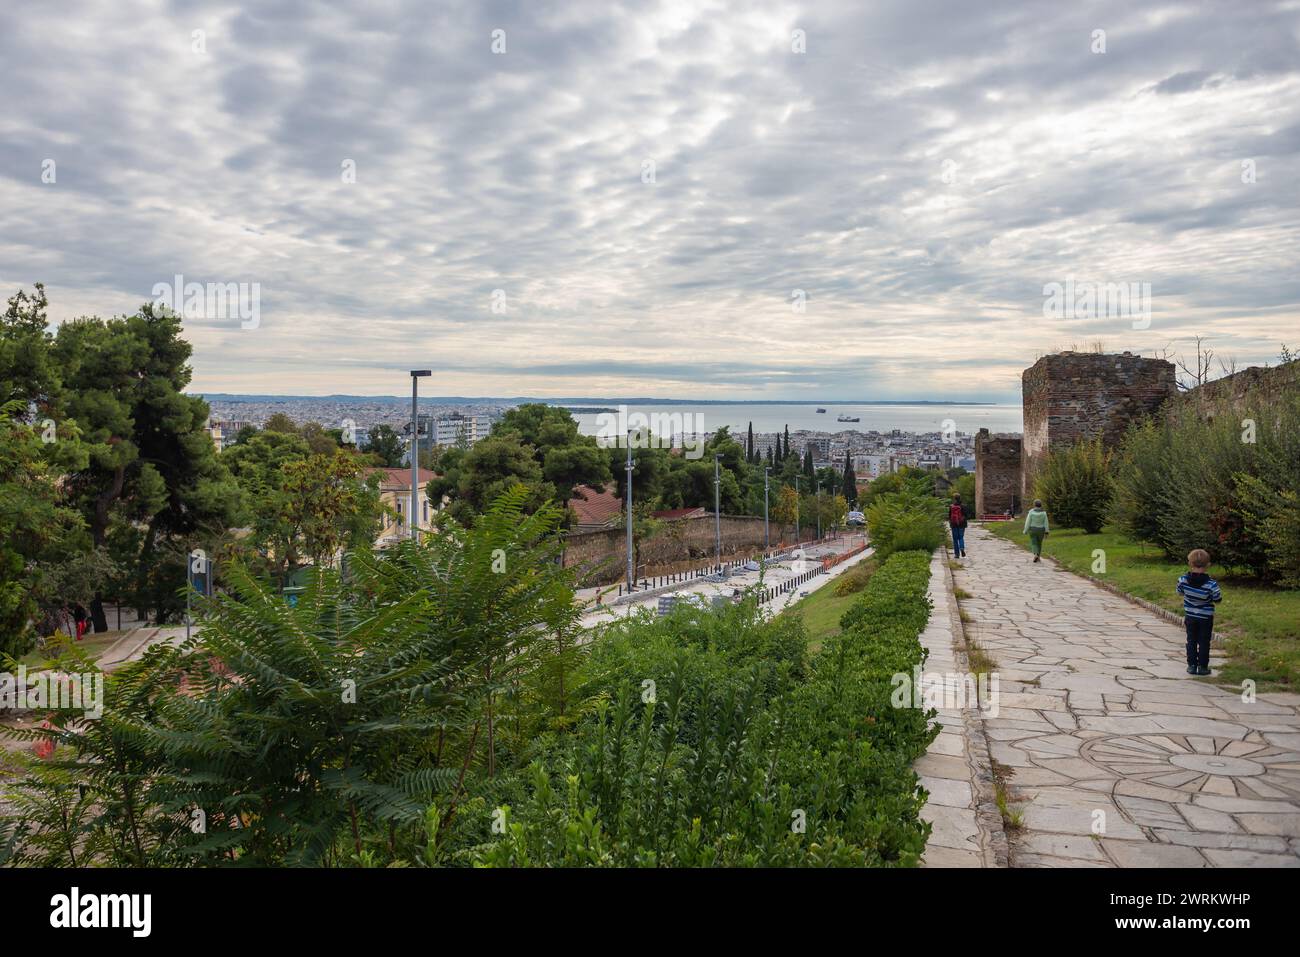 Eastern part of Walls of Thessaloniki, remains of Byzantine walls surrounding city of Thessaloniki during the Middle Ages, Greece Stock Photo